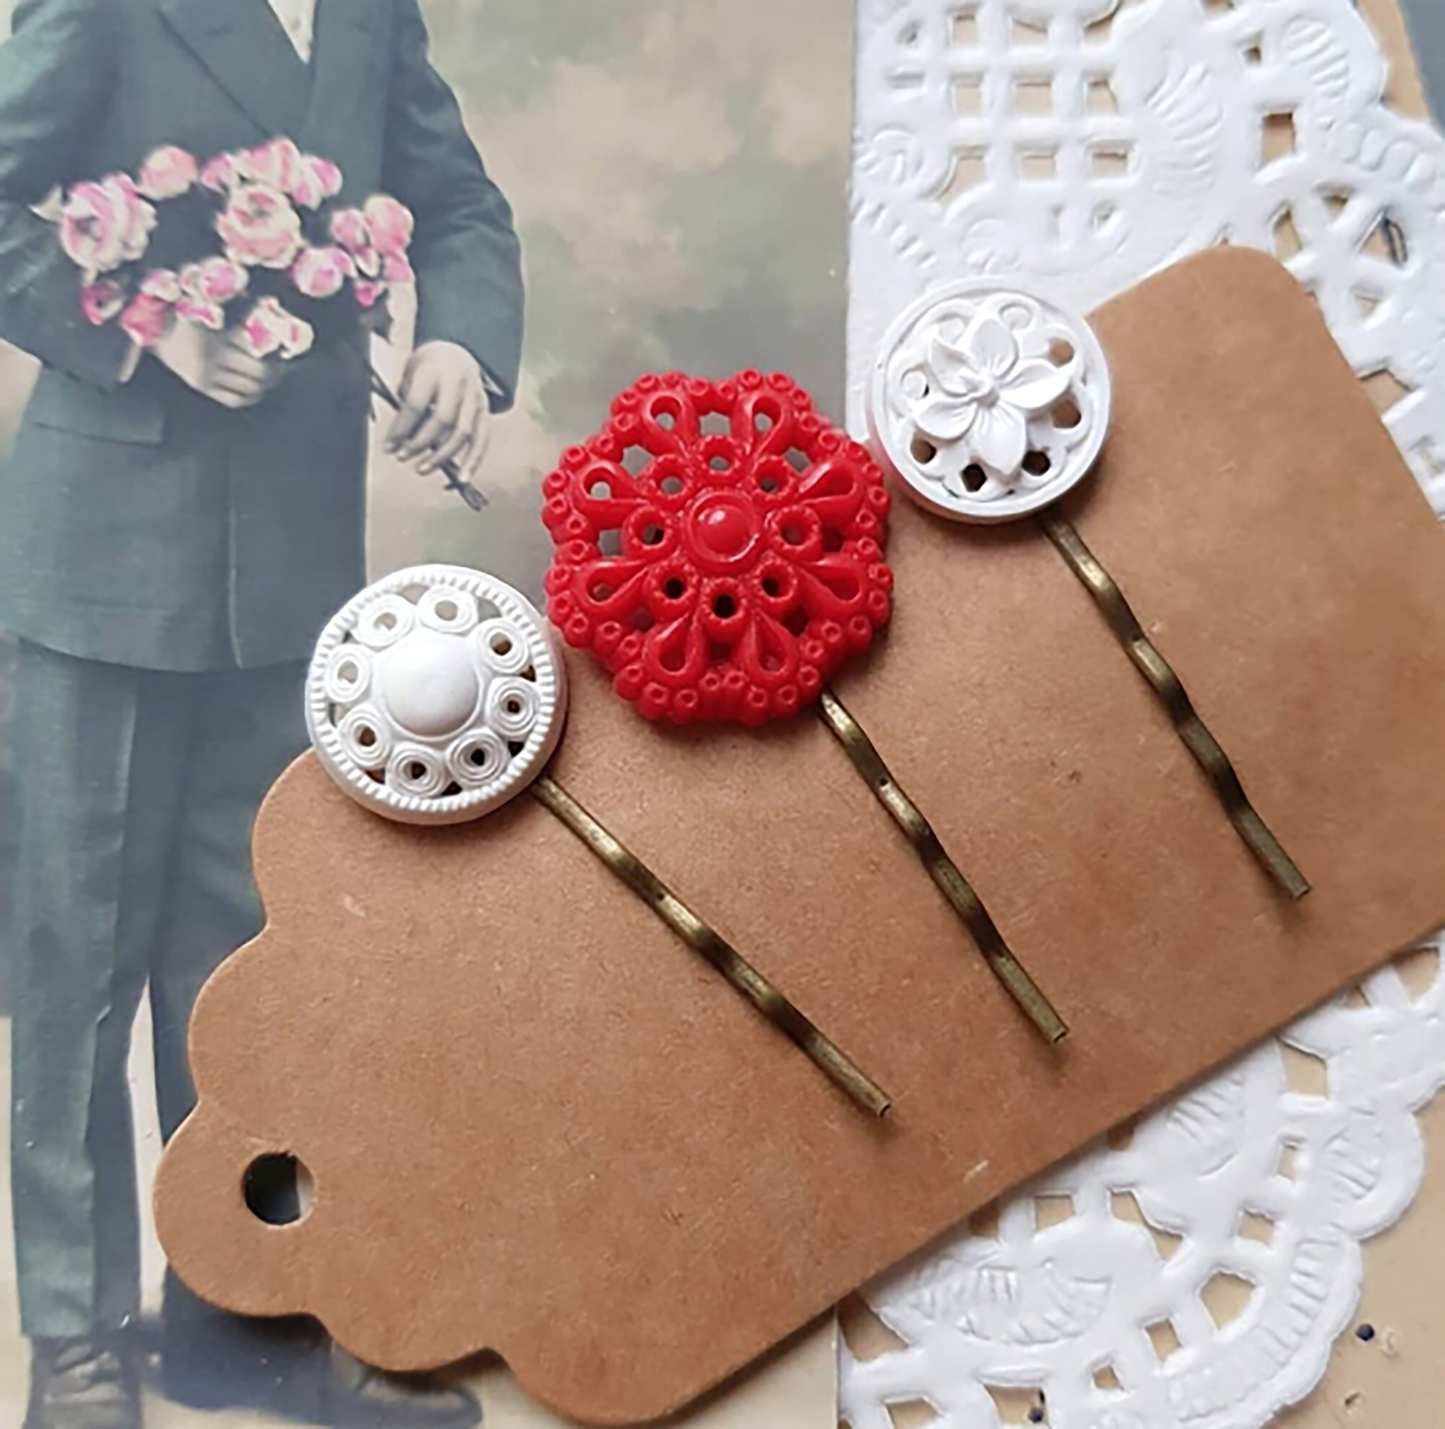 "Accessorize in style with our Button Bobby Pins, crafted from a curated selection of vintage buttons for a one-of-a-kind finish."